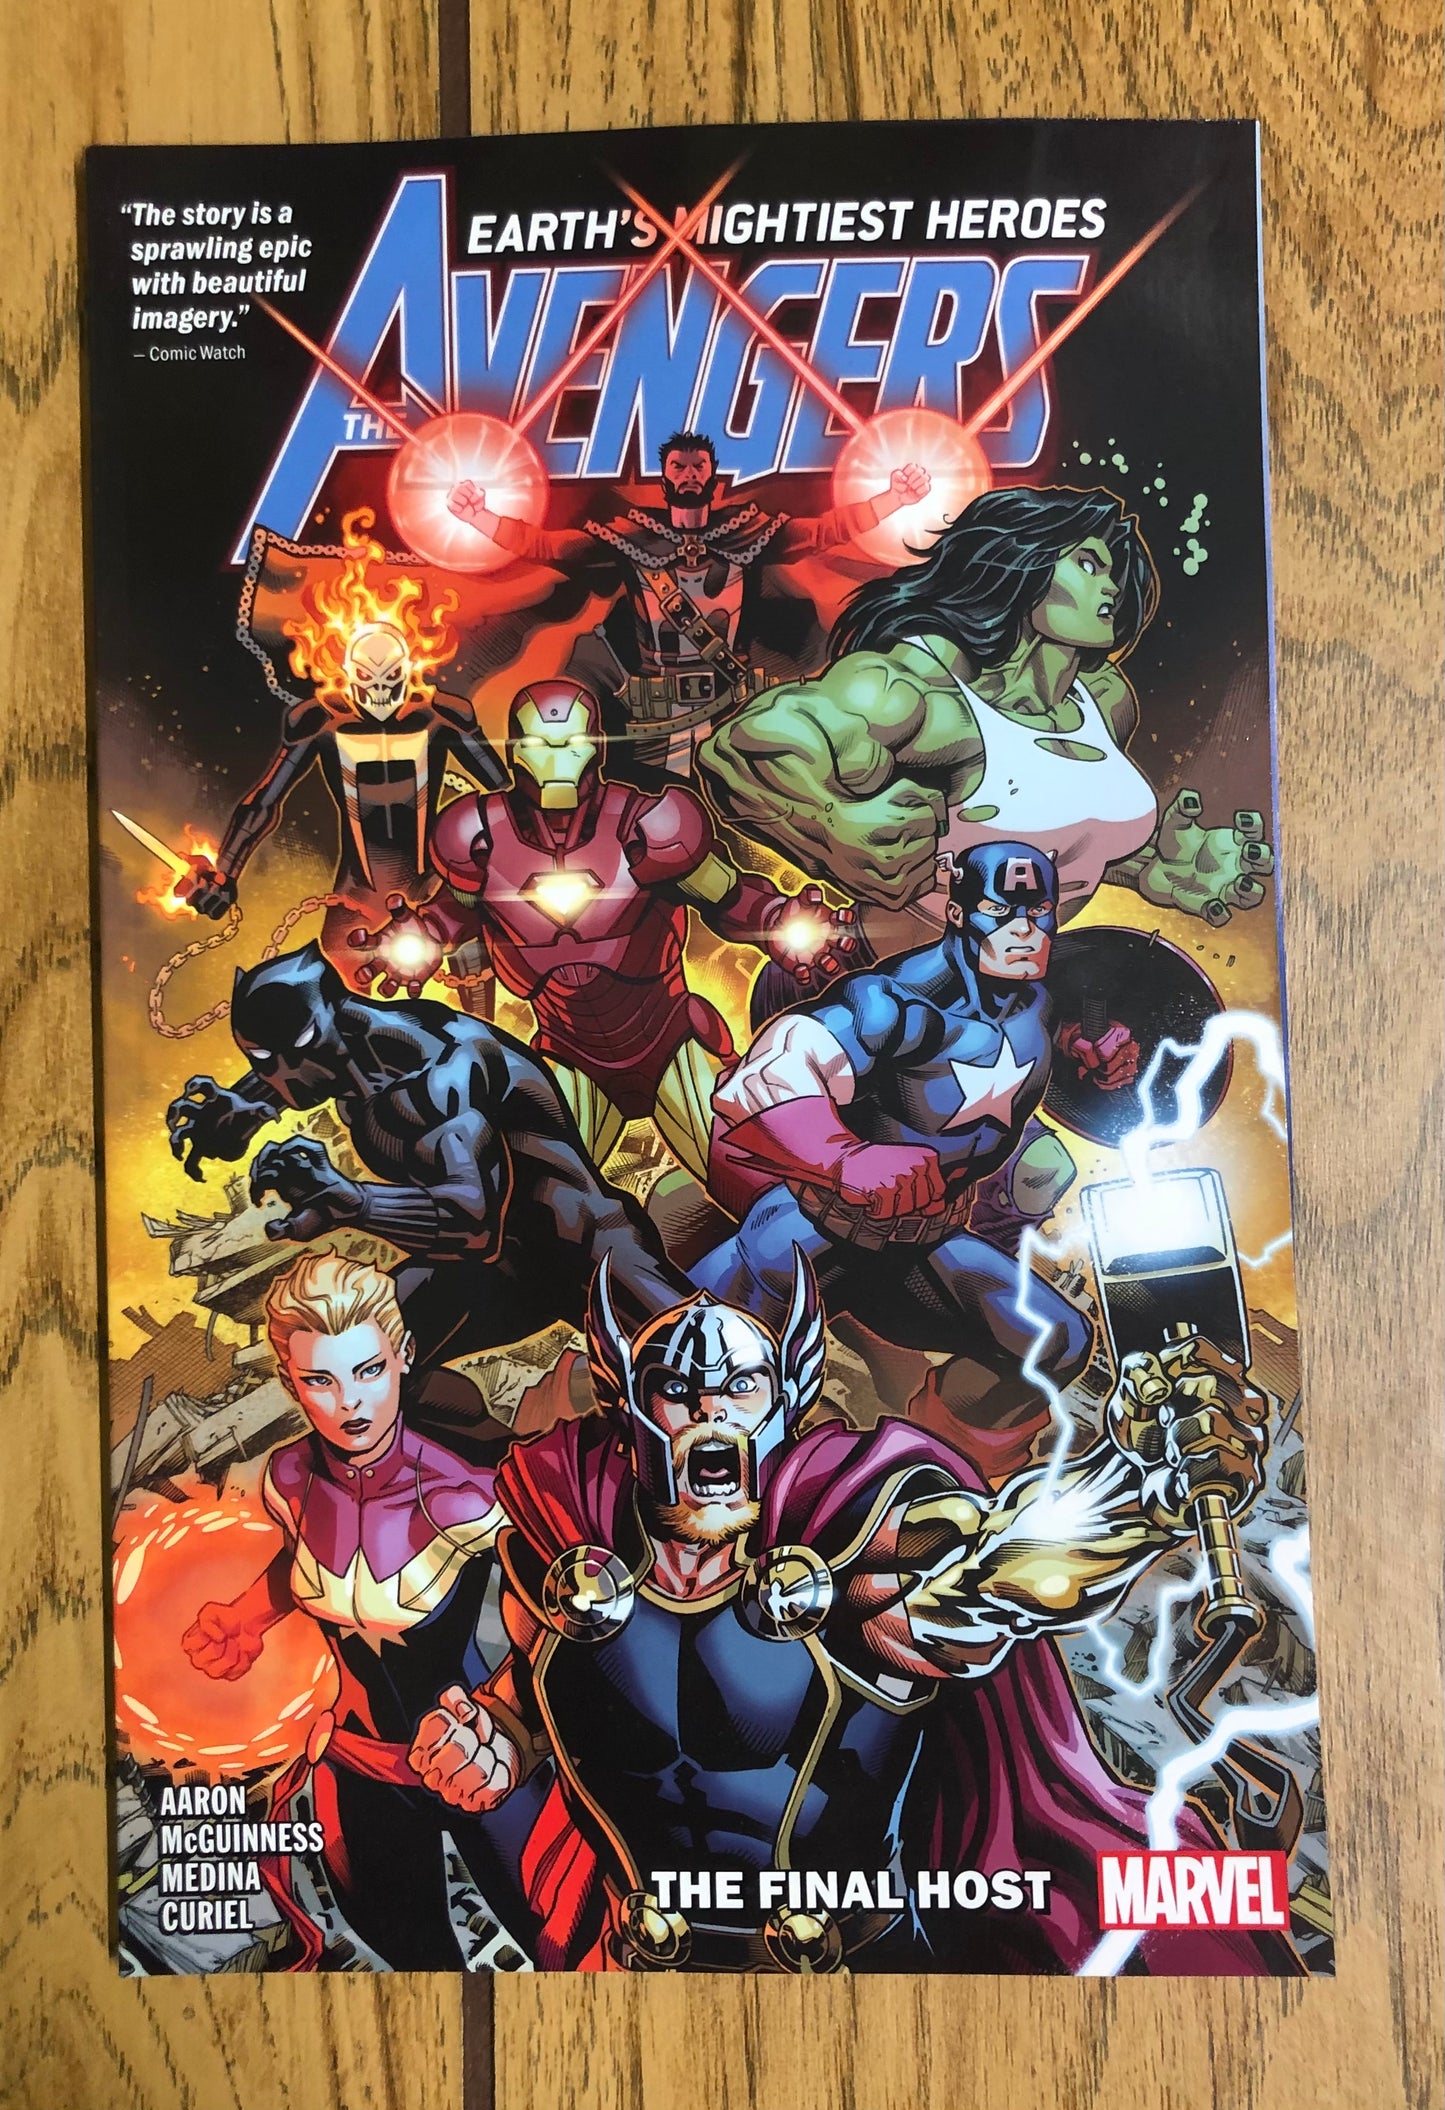 Earth's Mightiest Heroes The Avengers: The Final Host vol.1